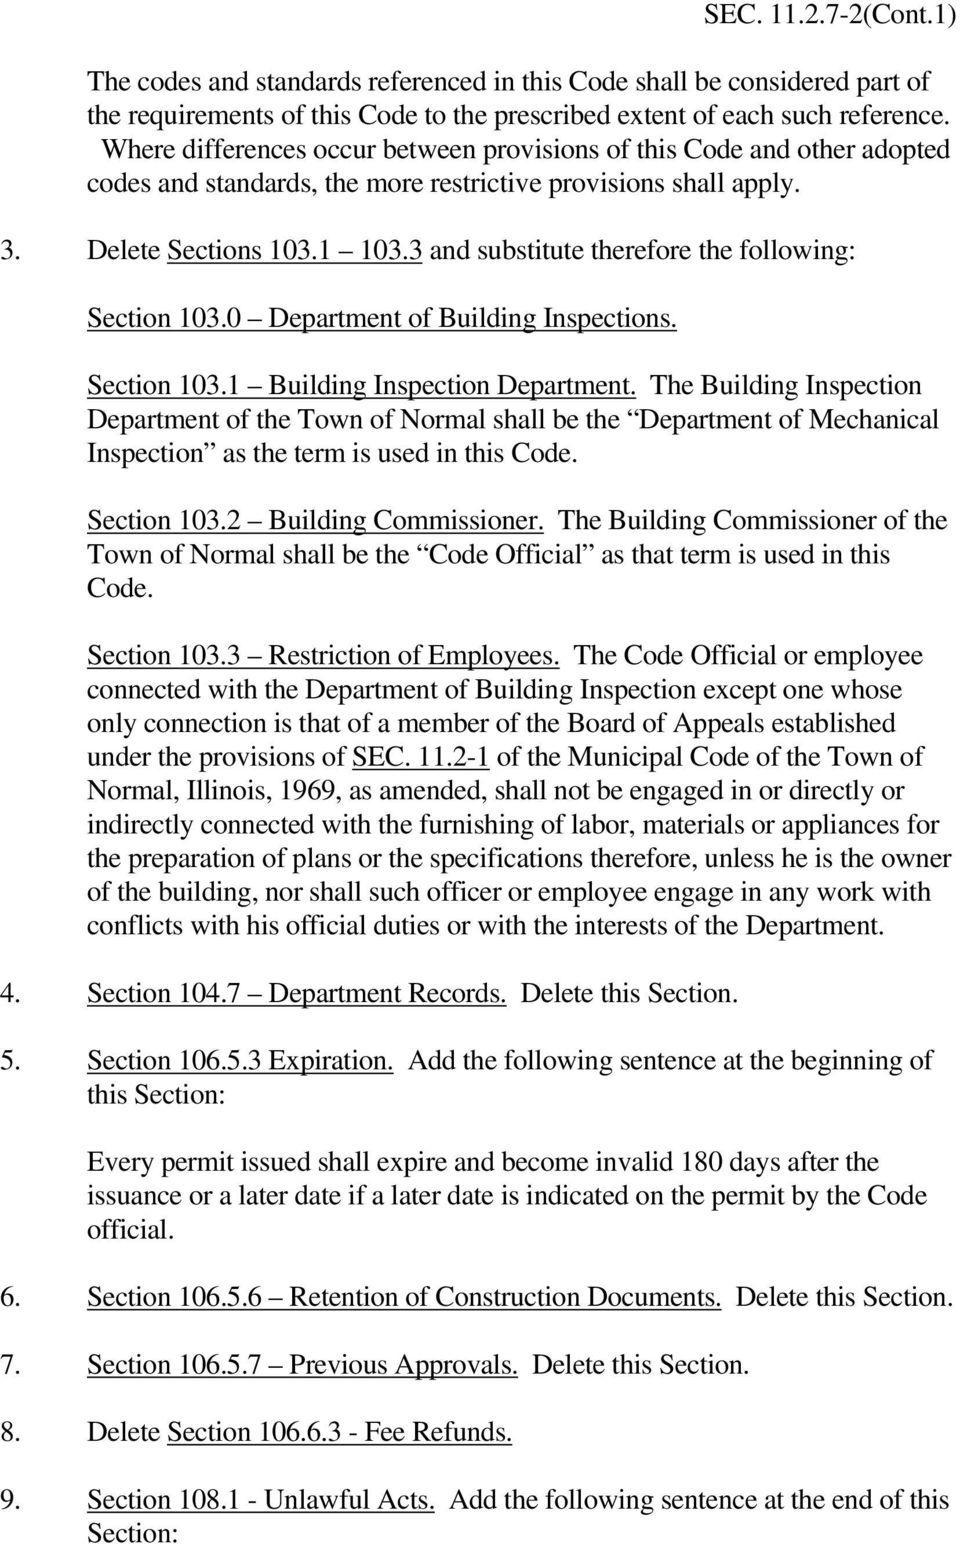 3 and substitute therefore the following: Section 103.0 Department of Building Inspections. Section 103.1 Building Inspection Department.